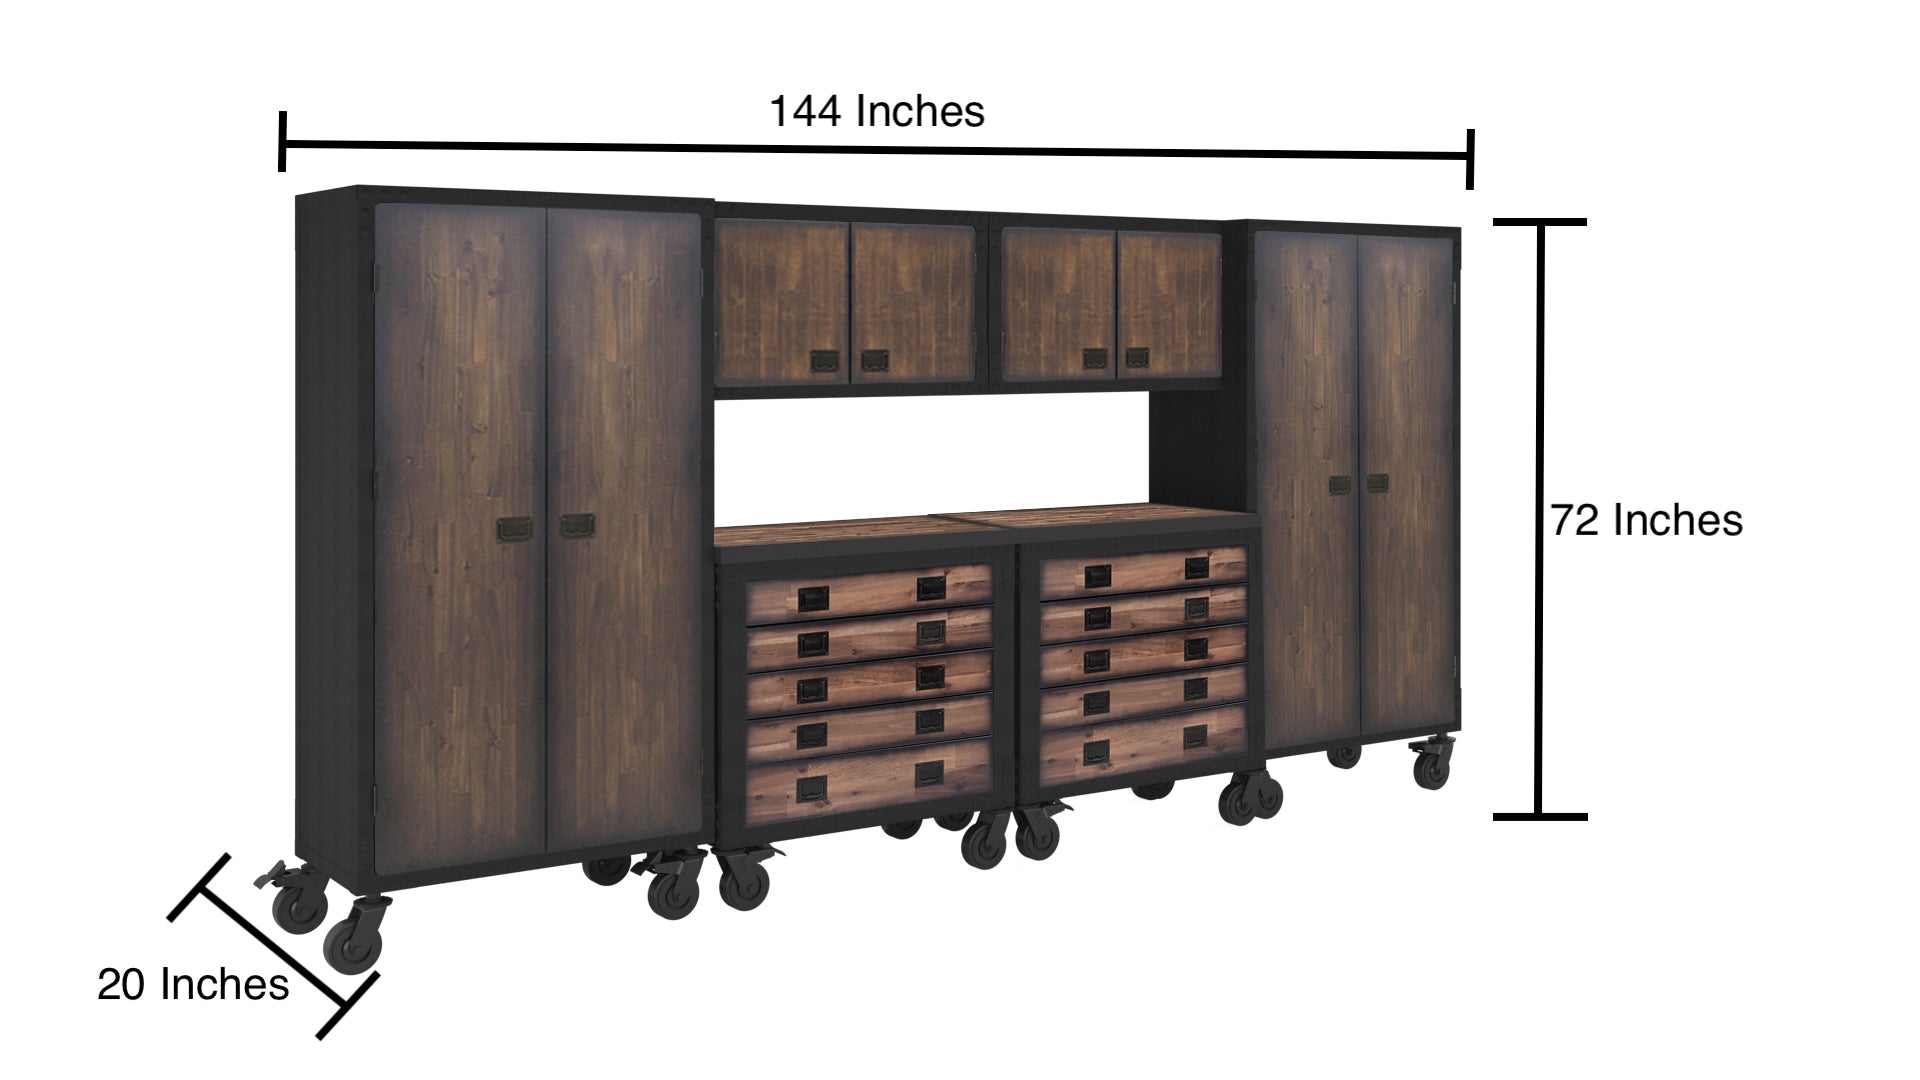 Duramax 6-Piece Garage Storage Combo Set with Tool Chests, Wall Cabinets and Free Standing Cabinets